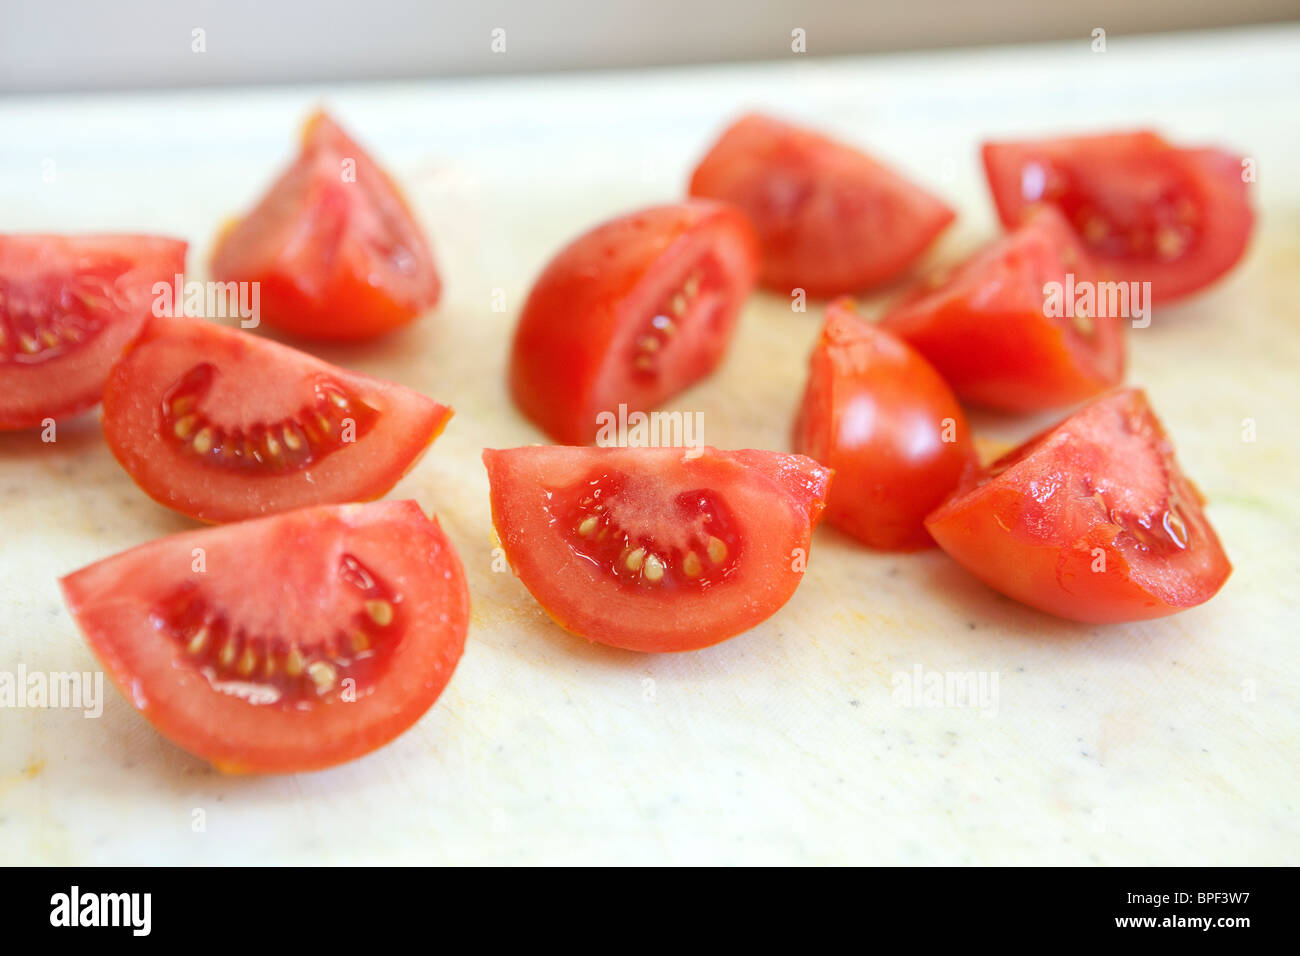 tomatoes prepared for a meal Stock Photo